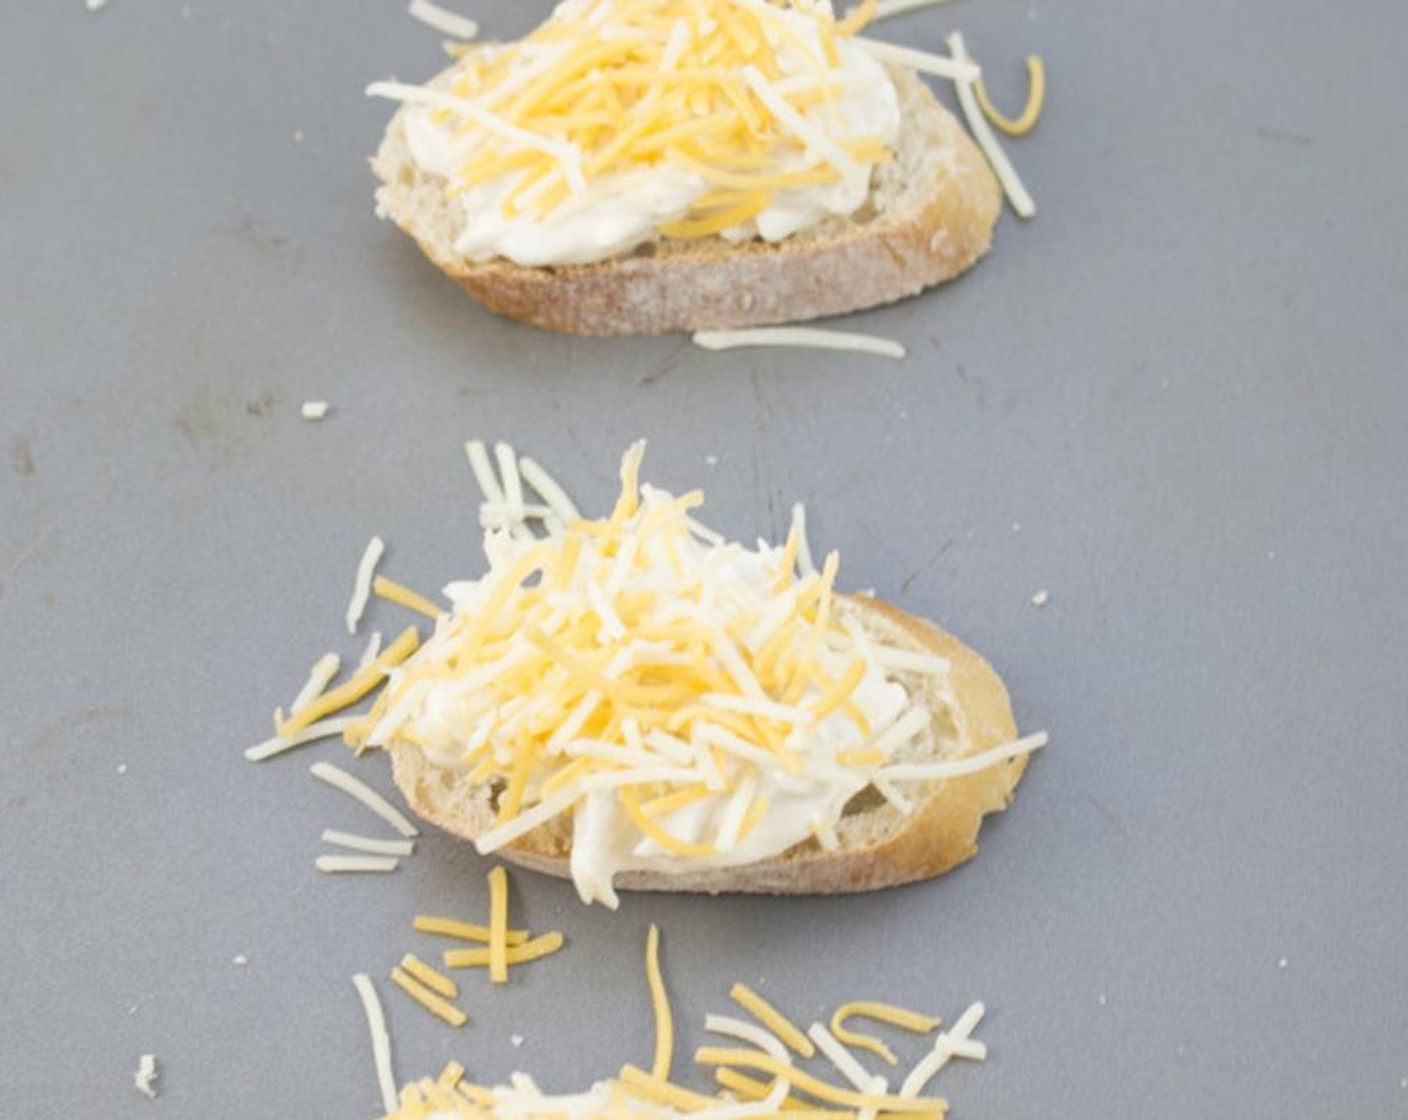 step 5 Top each slice of Baguette (1) with the crab mixture and some Shredded Cheddar Cheese (1/2 cup). Place on an ungreased baking sheet and bake in the preheated oven for 5 minutes until the cheese is melted and golden brown.